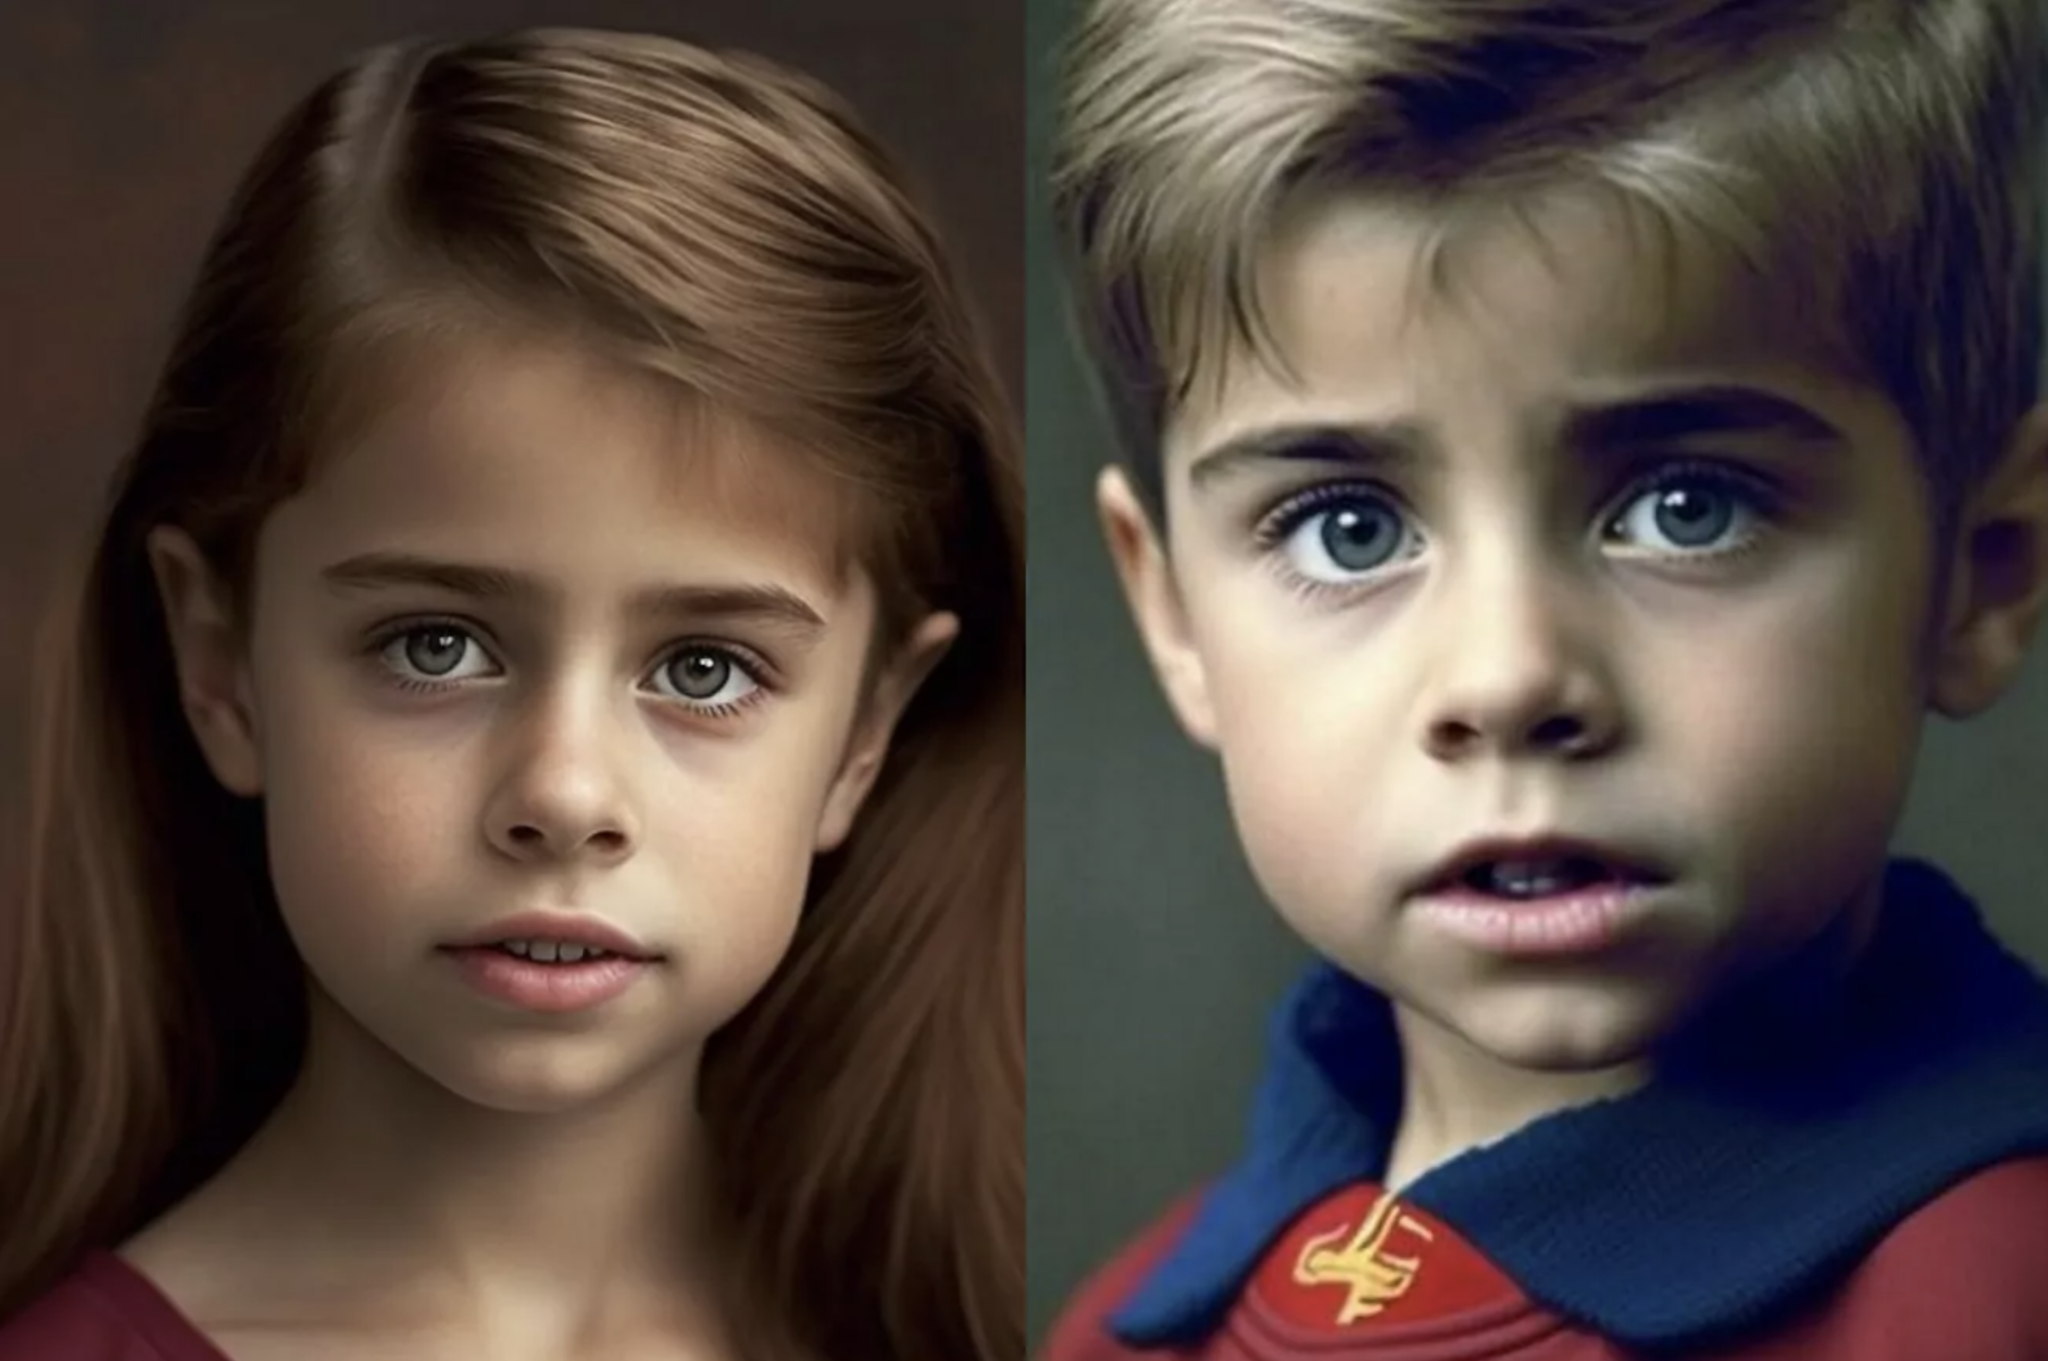 Pique, Clara Chia and what their children would look like according to Artificial Intelligence